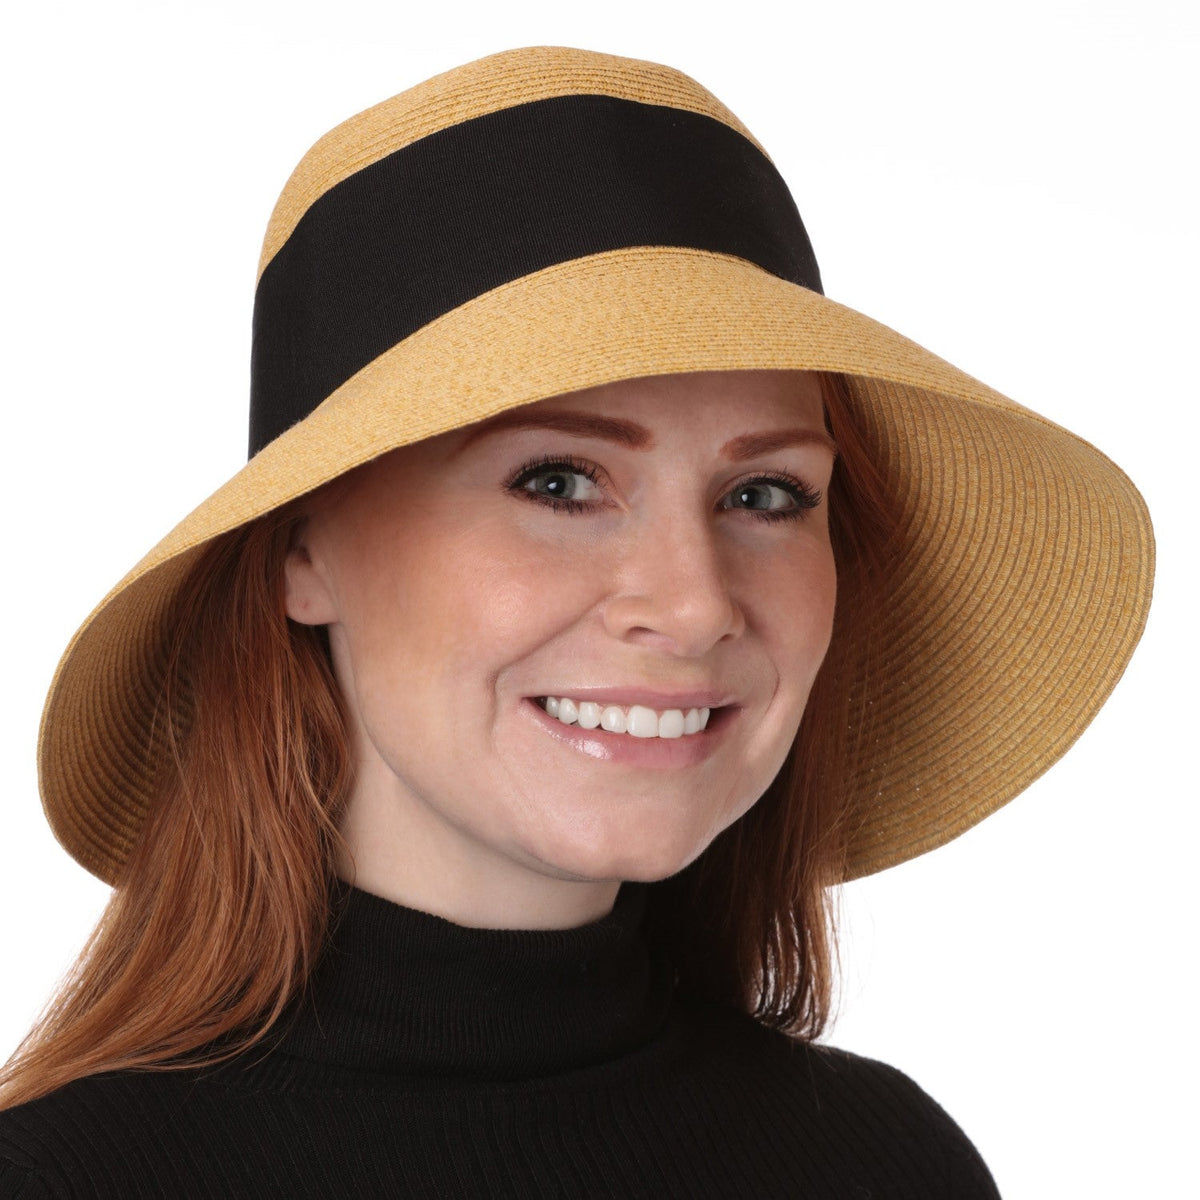 Roll-Up Women's Straw Sun Hat with Bow